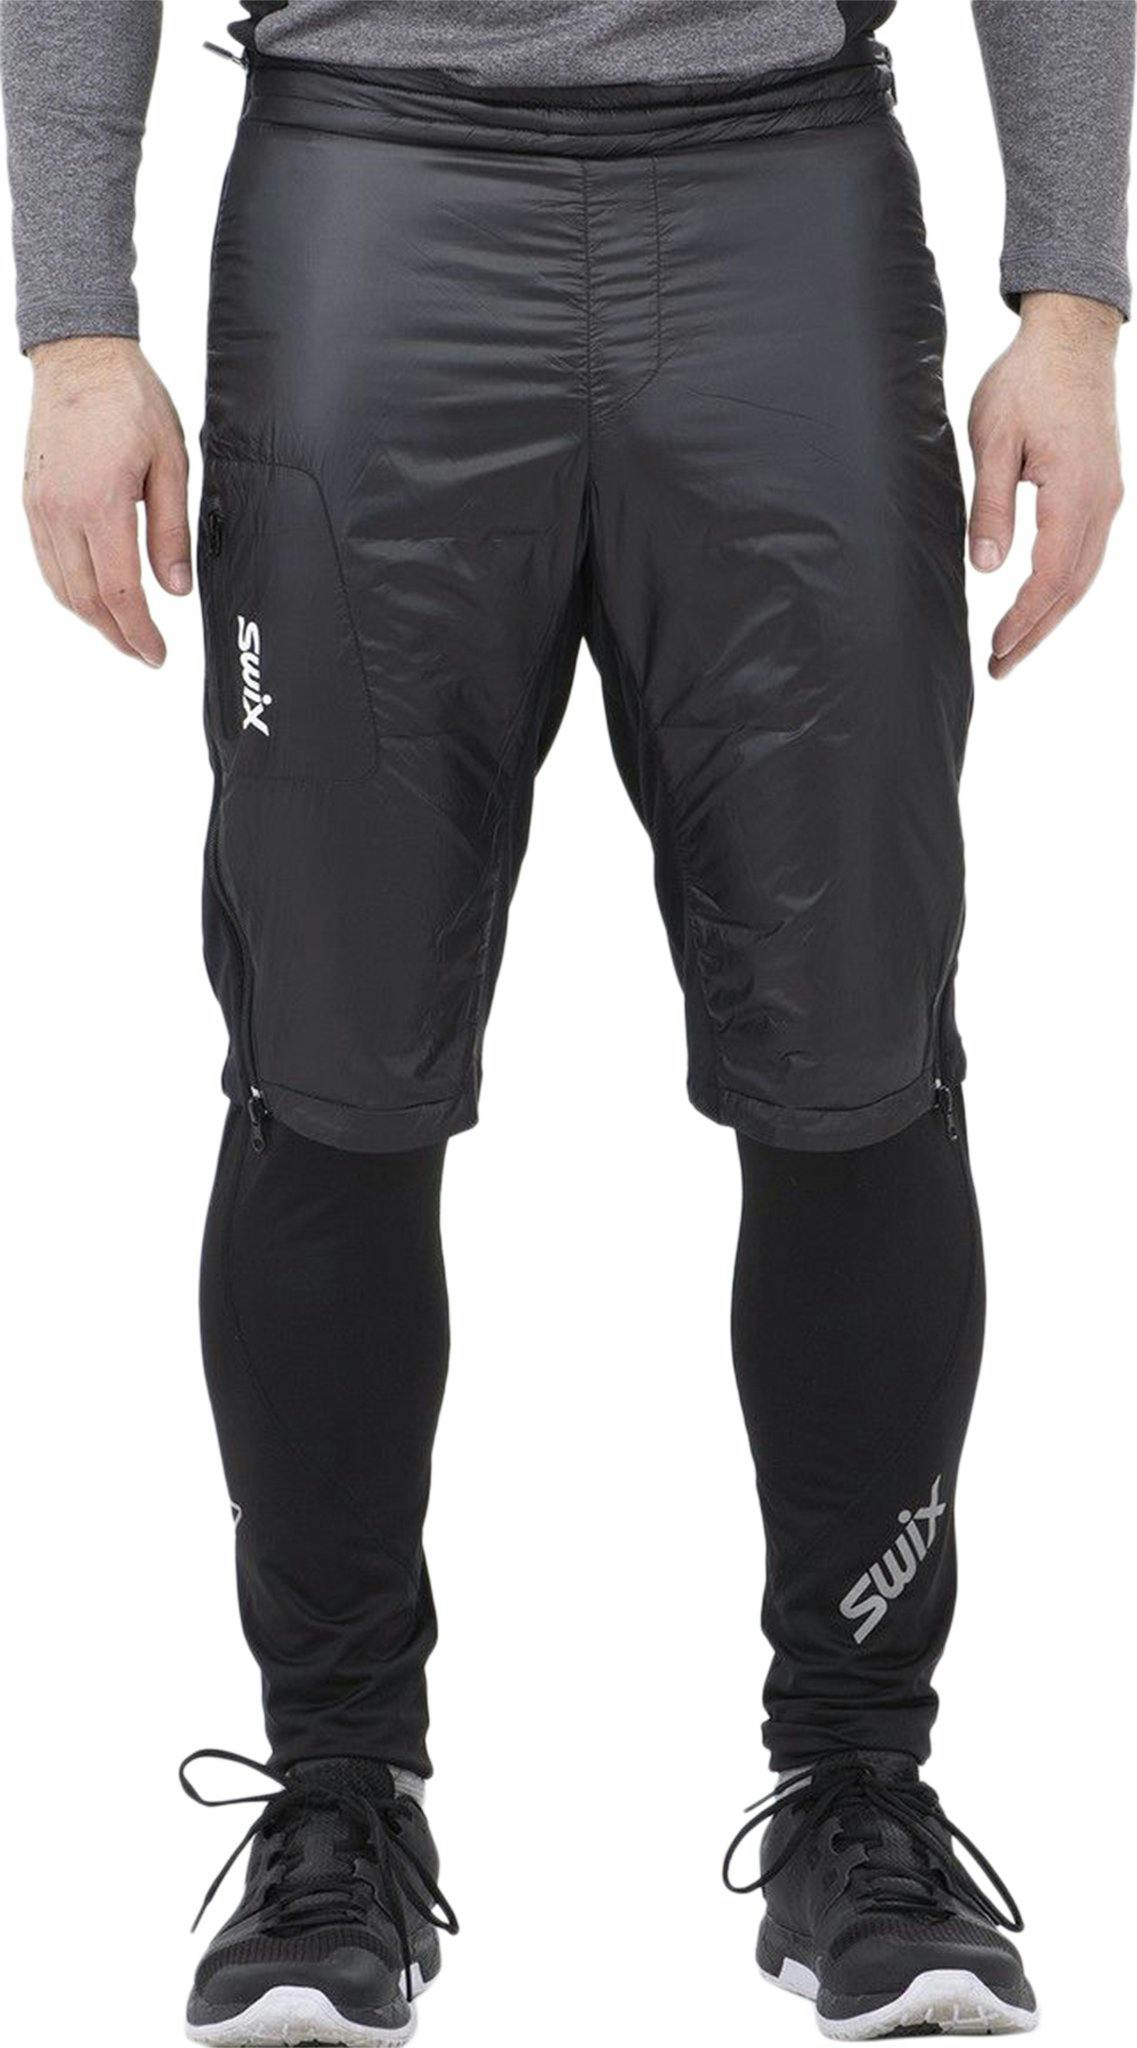 Product image for Menali 2.0 Insulated Shorts - Men's